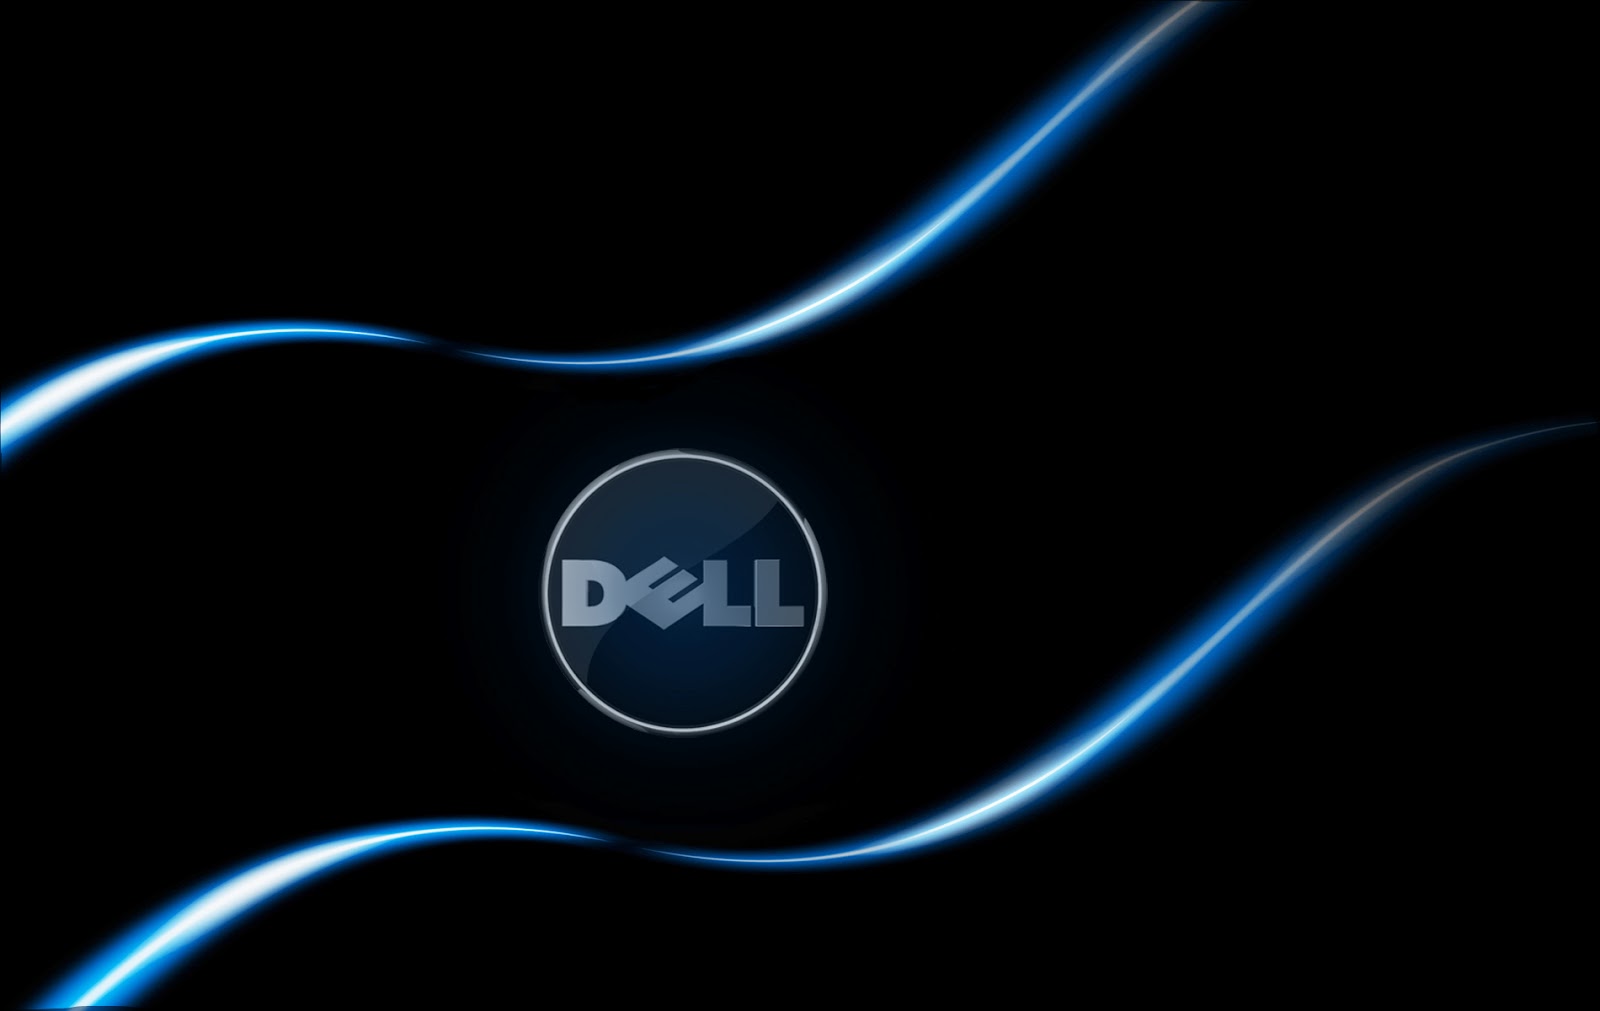 HD WALLPAPERS HD Wallpapers For Dell Laptop 1600x1011